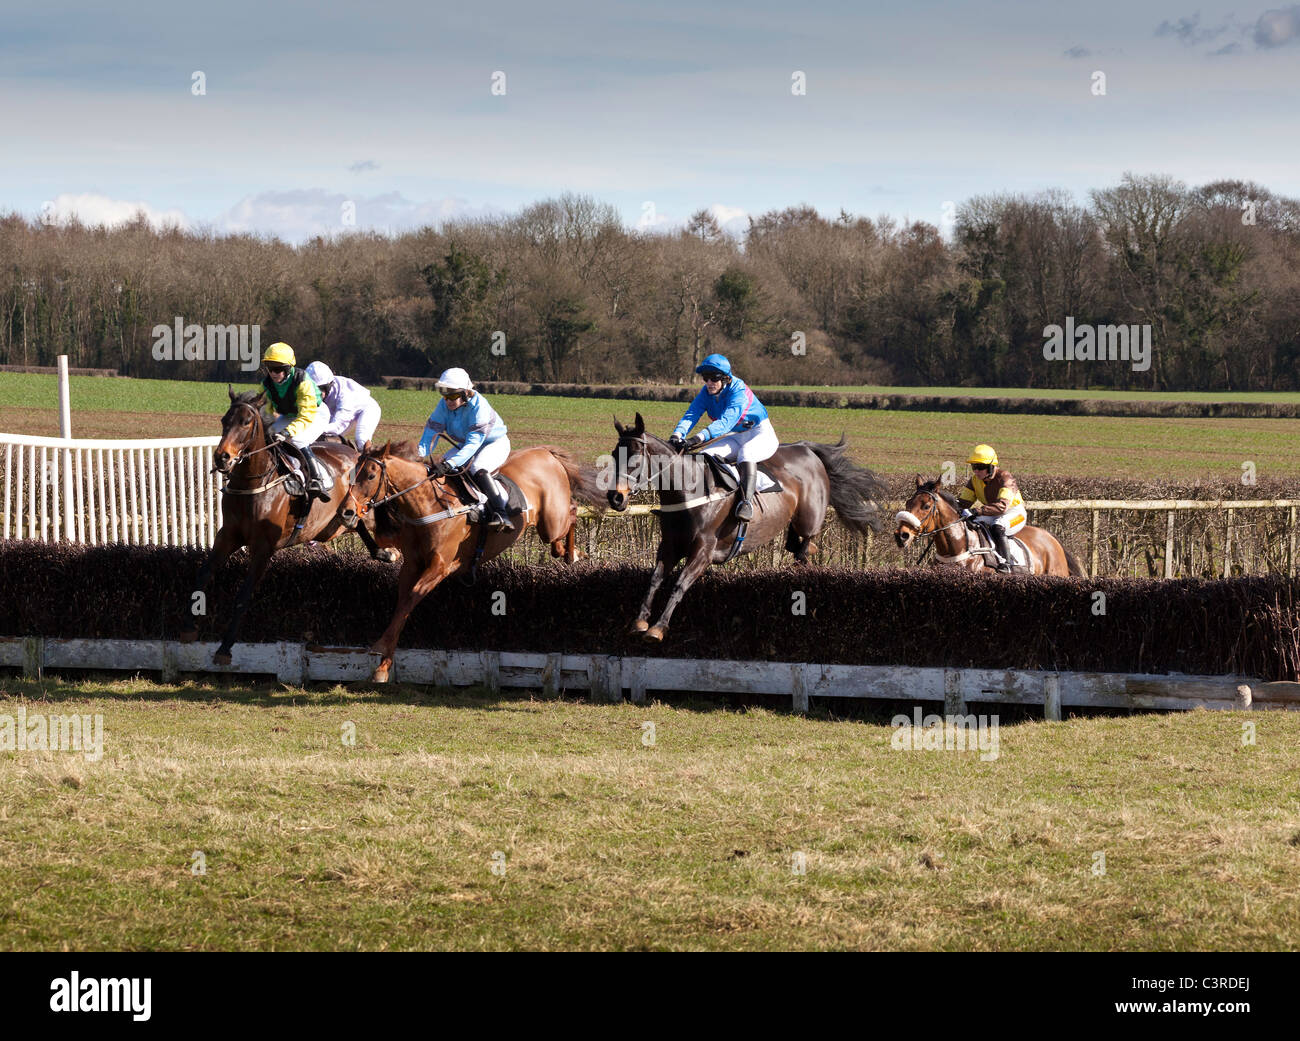 RACING AUF POINT TO POINT AT HOWICK NAHE CHEPSTOW WALES UK Stockfoto